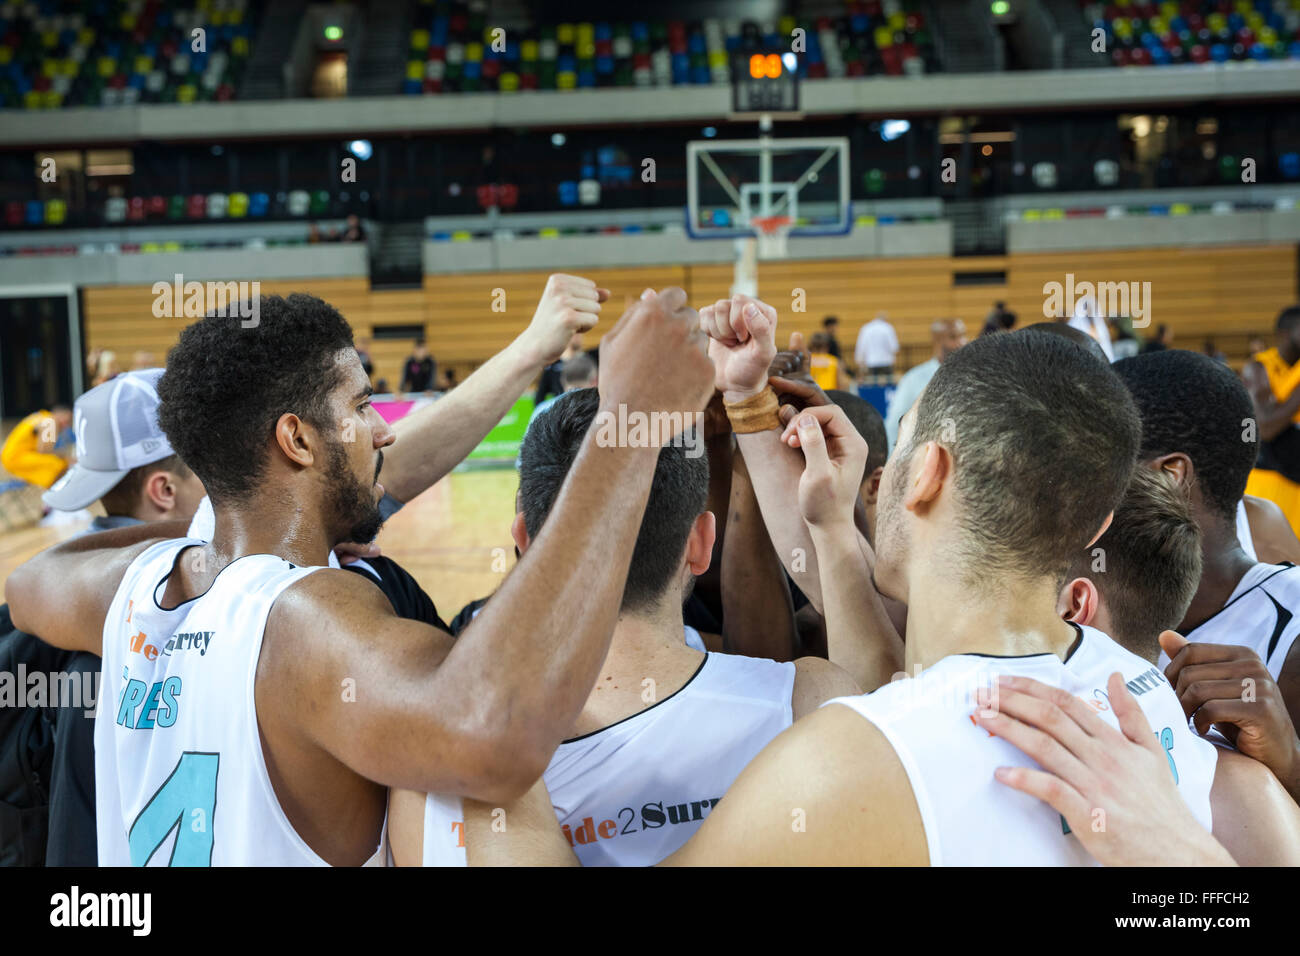 London, UK. 12th February 2016. Surrey Scorchers players celebrate their win after the London Lions vs. Surrey Scorchers BBL game at the Copper Box Arena in the Olympic Park. Surrey Scorchers win 90-82 Credit:  Imageplotter News and Sports/Alamy Live News Stock Photo